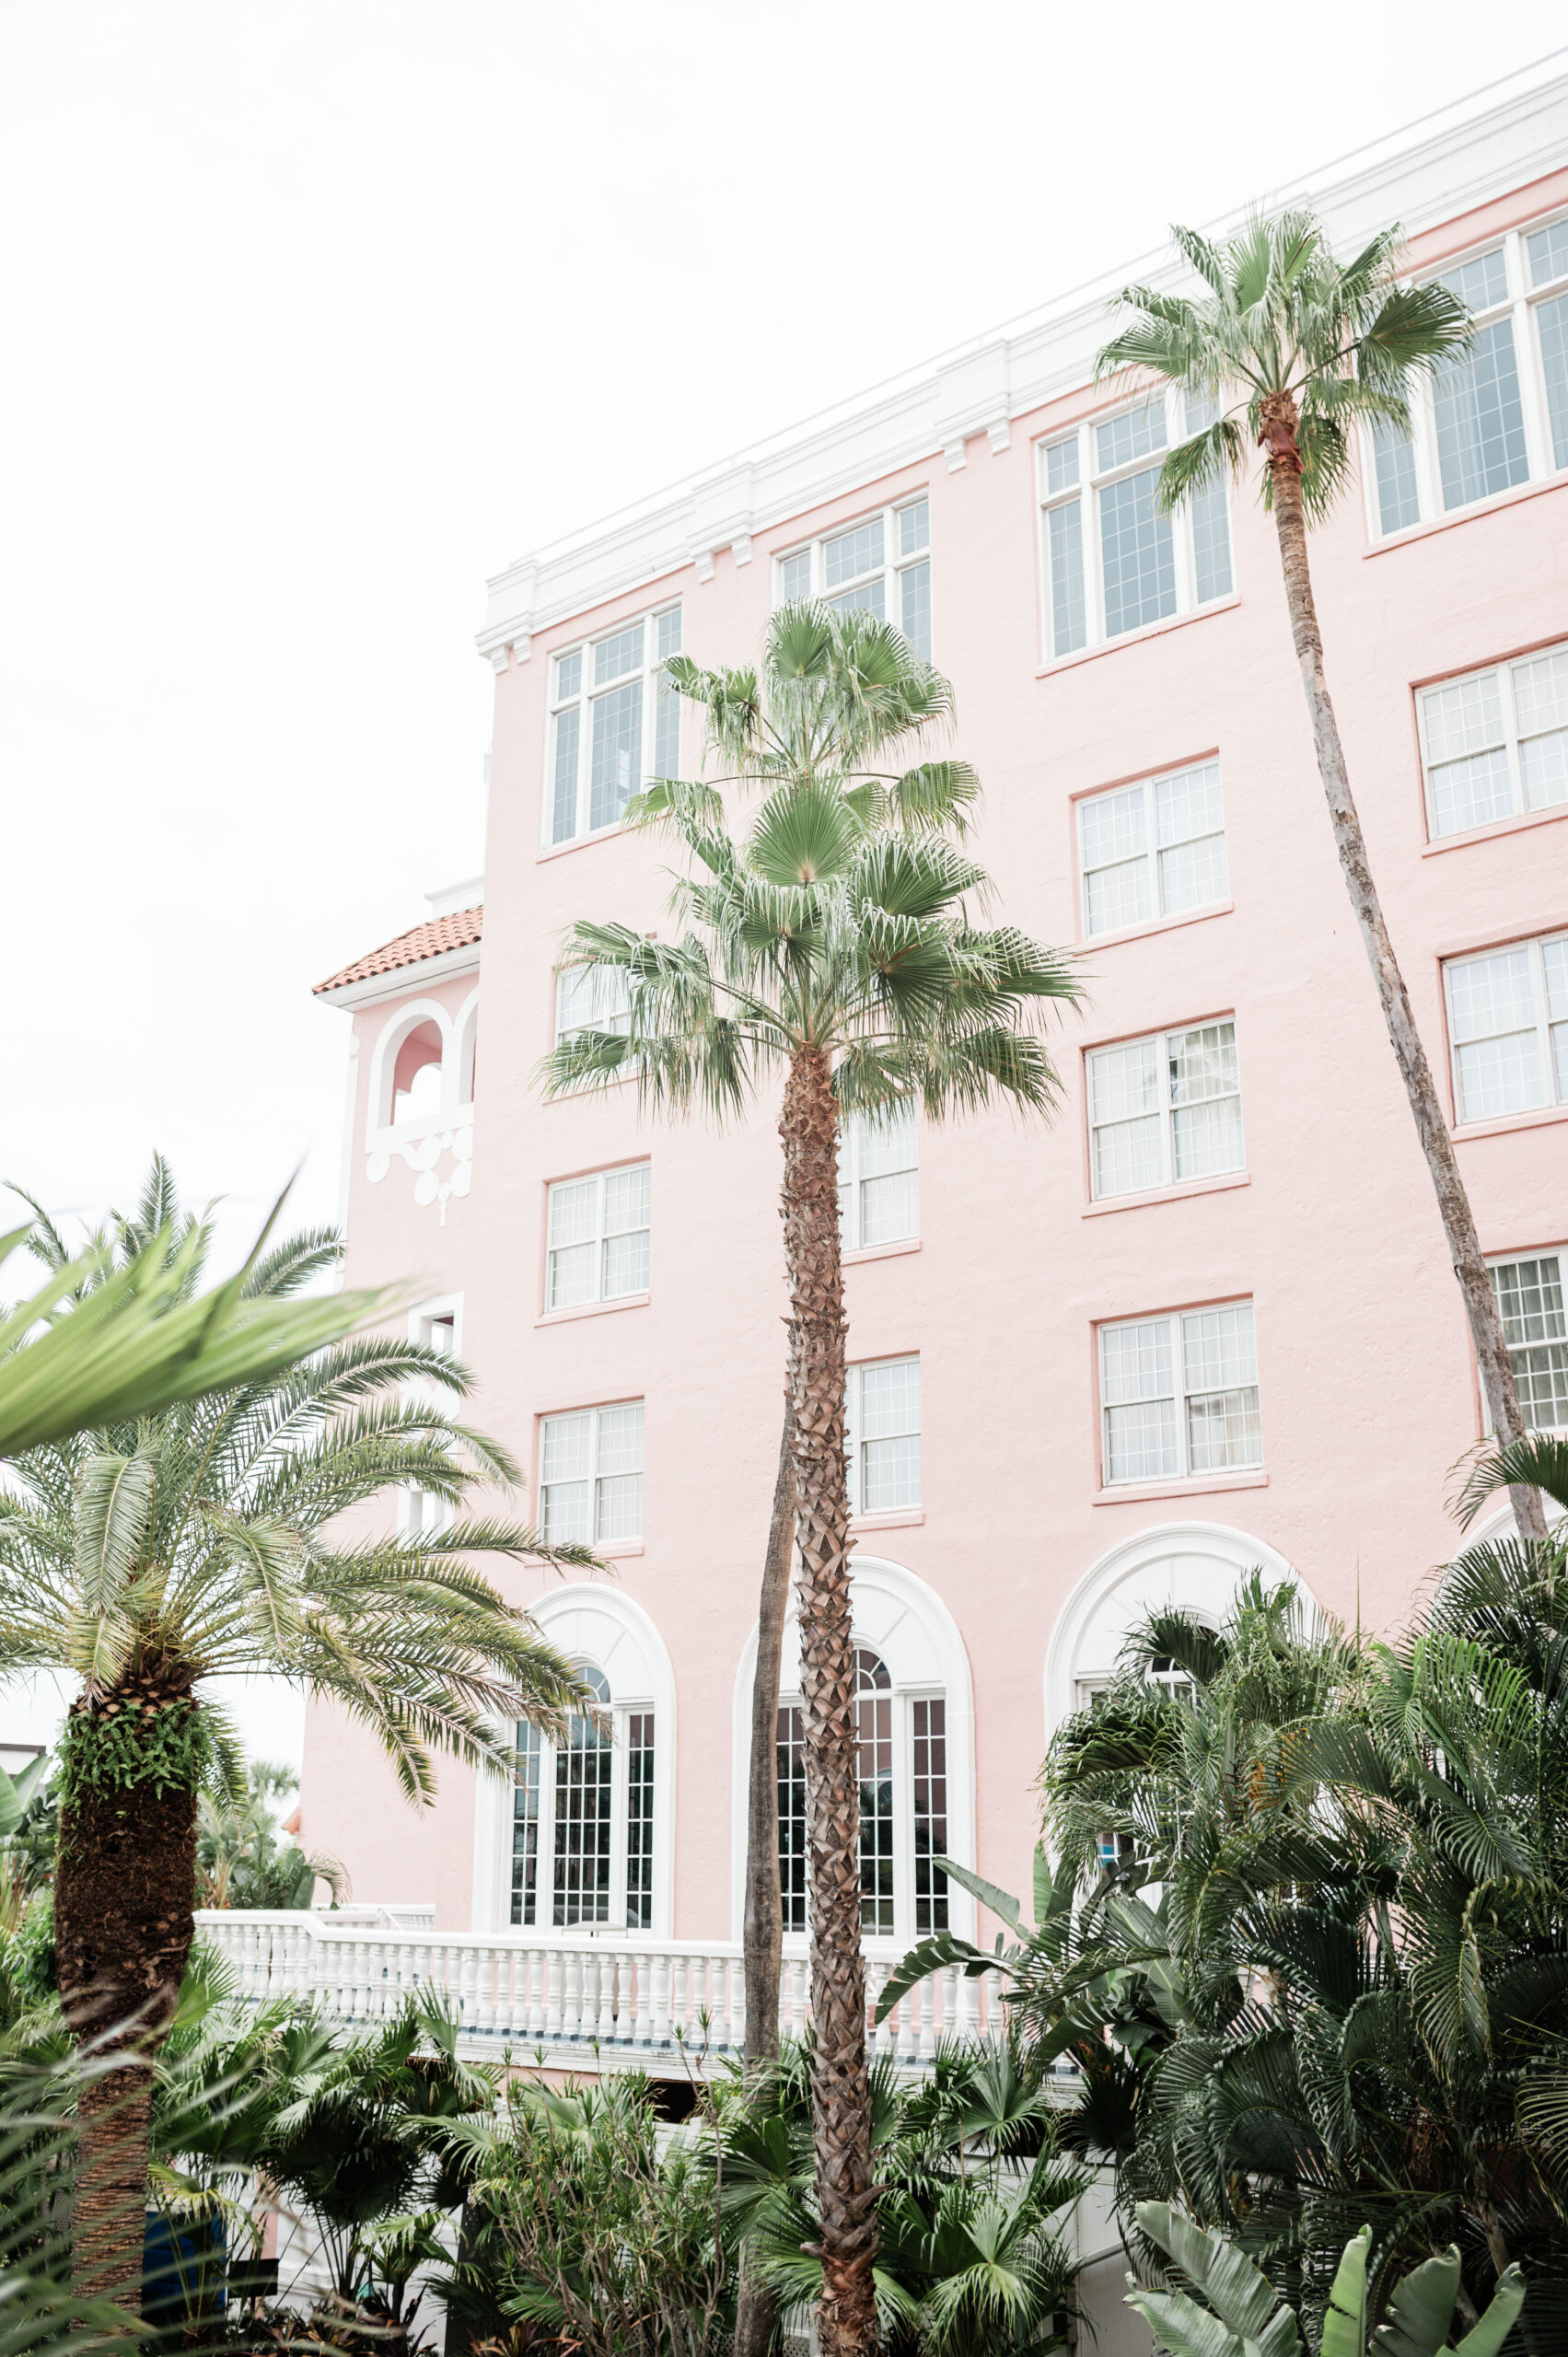 Pink Palace exterior and palm trees at The Don CeSar in Saint Pete, Florida's most instagrammable hotel